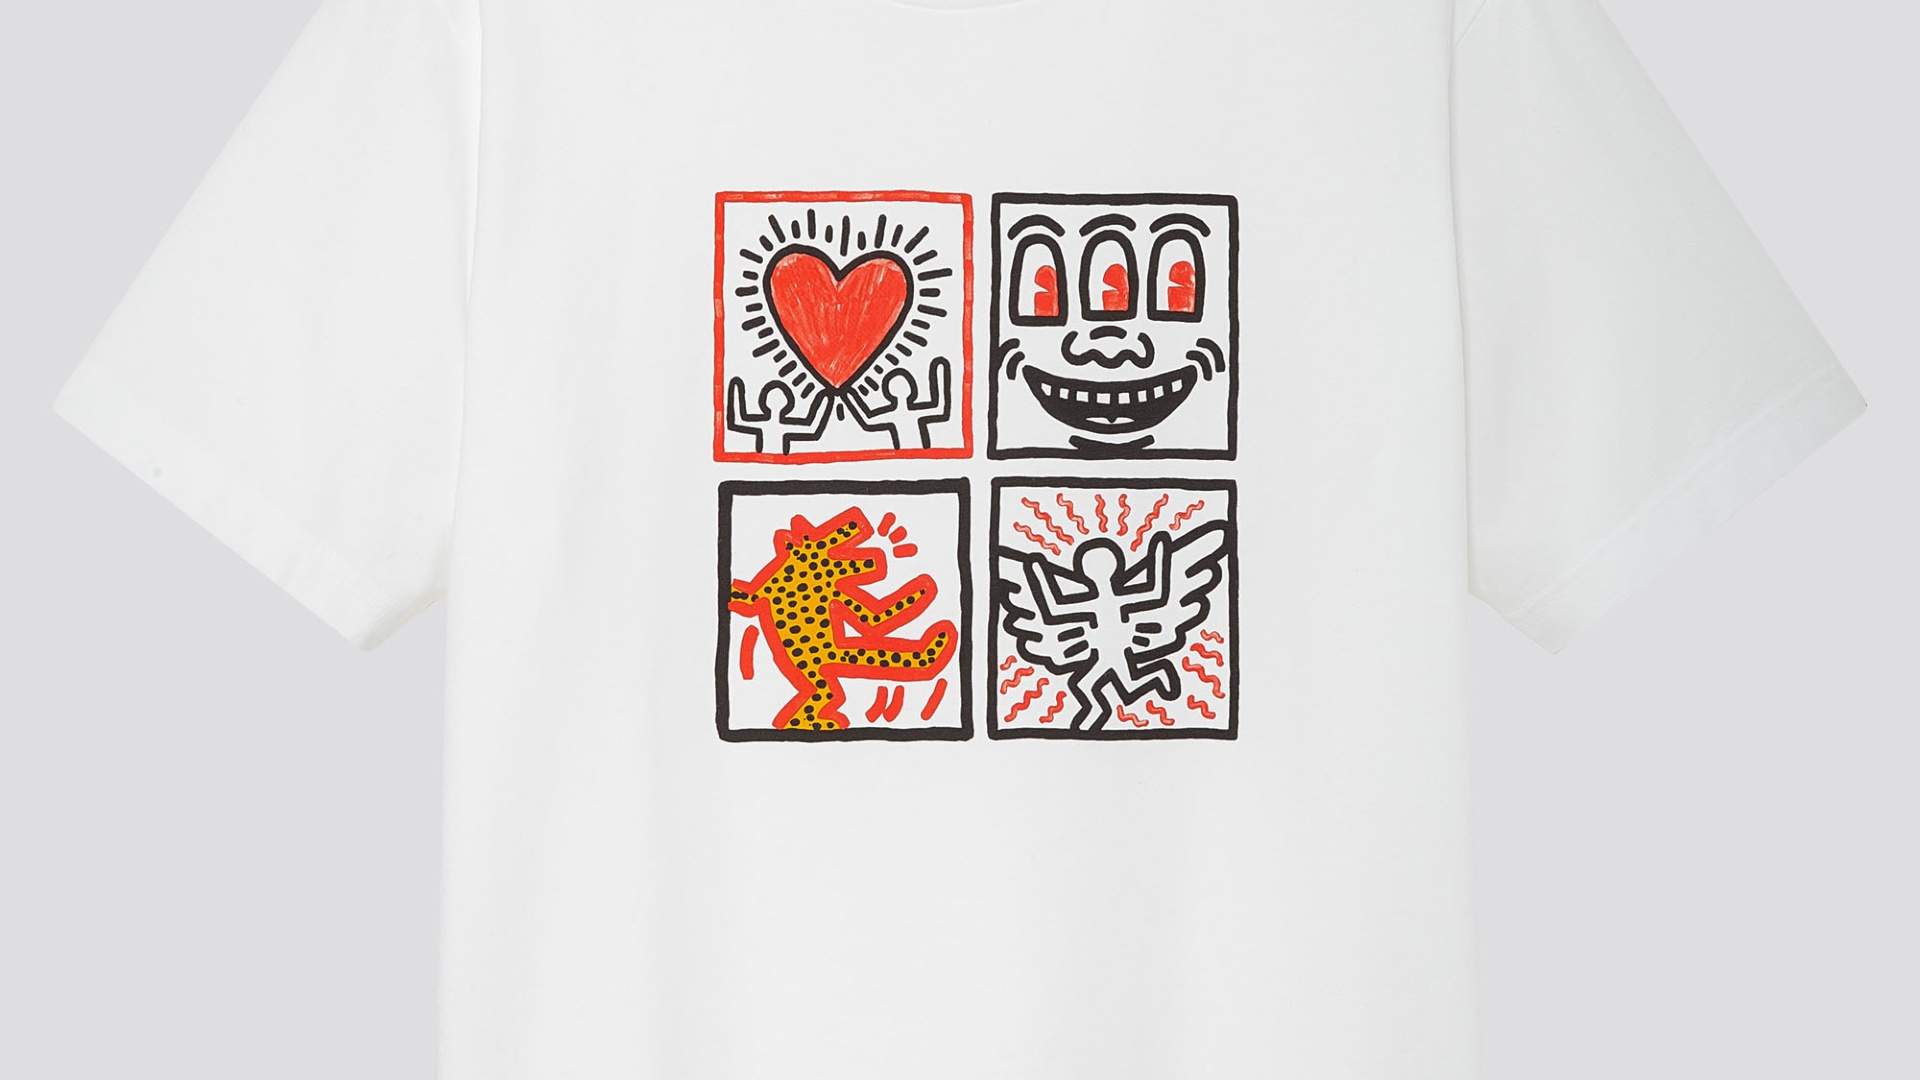 Uniqlo Is Launching a Line of T-Shirts Dedicated to Keith Haring and Jean-Michel Basquiat